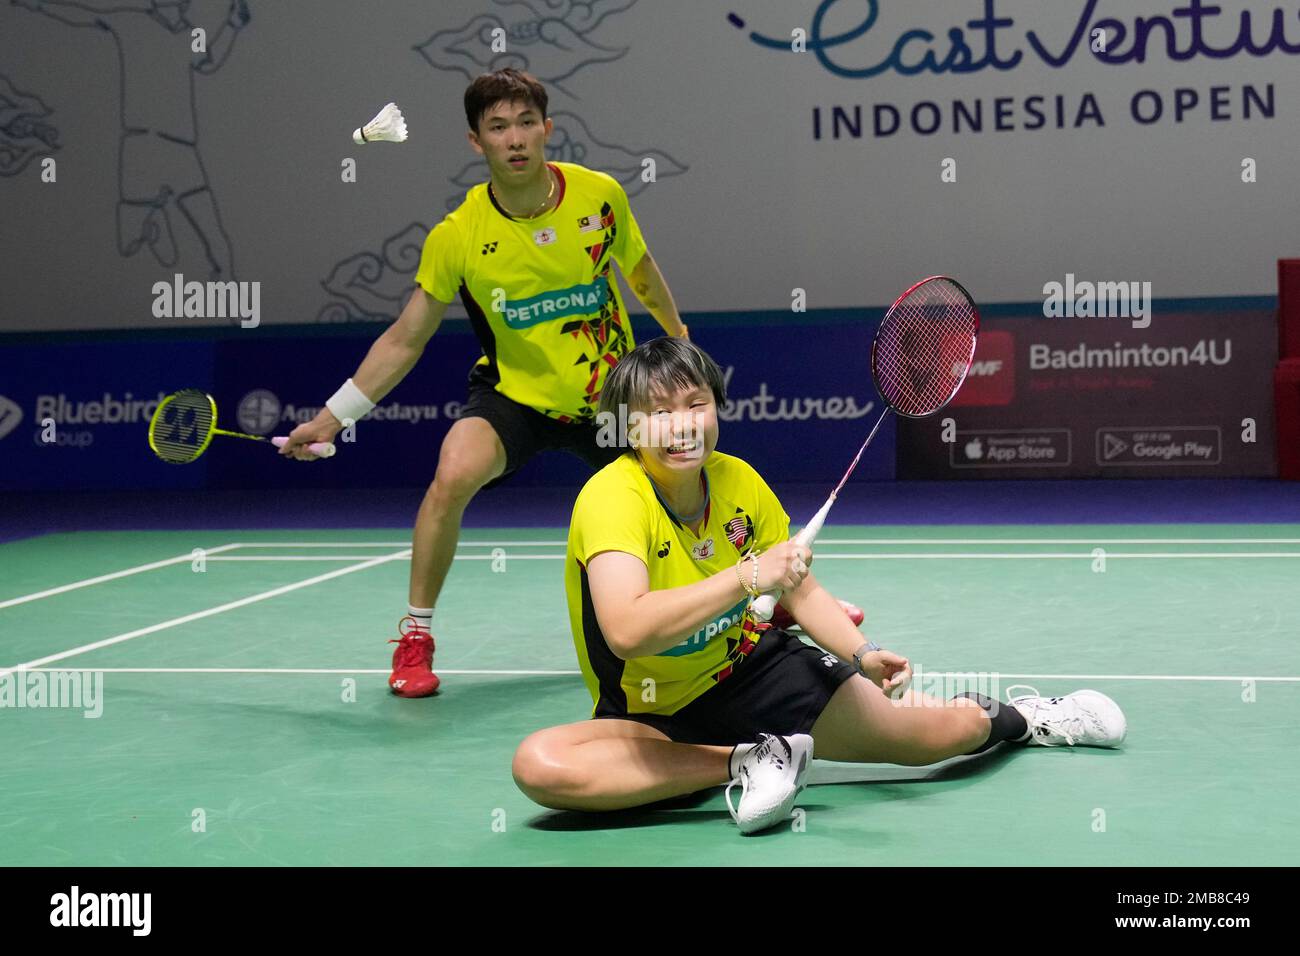 Malaysias Chen Tang Ji, rear, and Valeree Siow compete against Chinas Wang Yi Lyu and Huang Dong Ping during their mixed doubles quarterfinal match at Indonesia Open badminton tournament at Istora Gelora